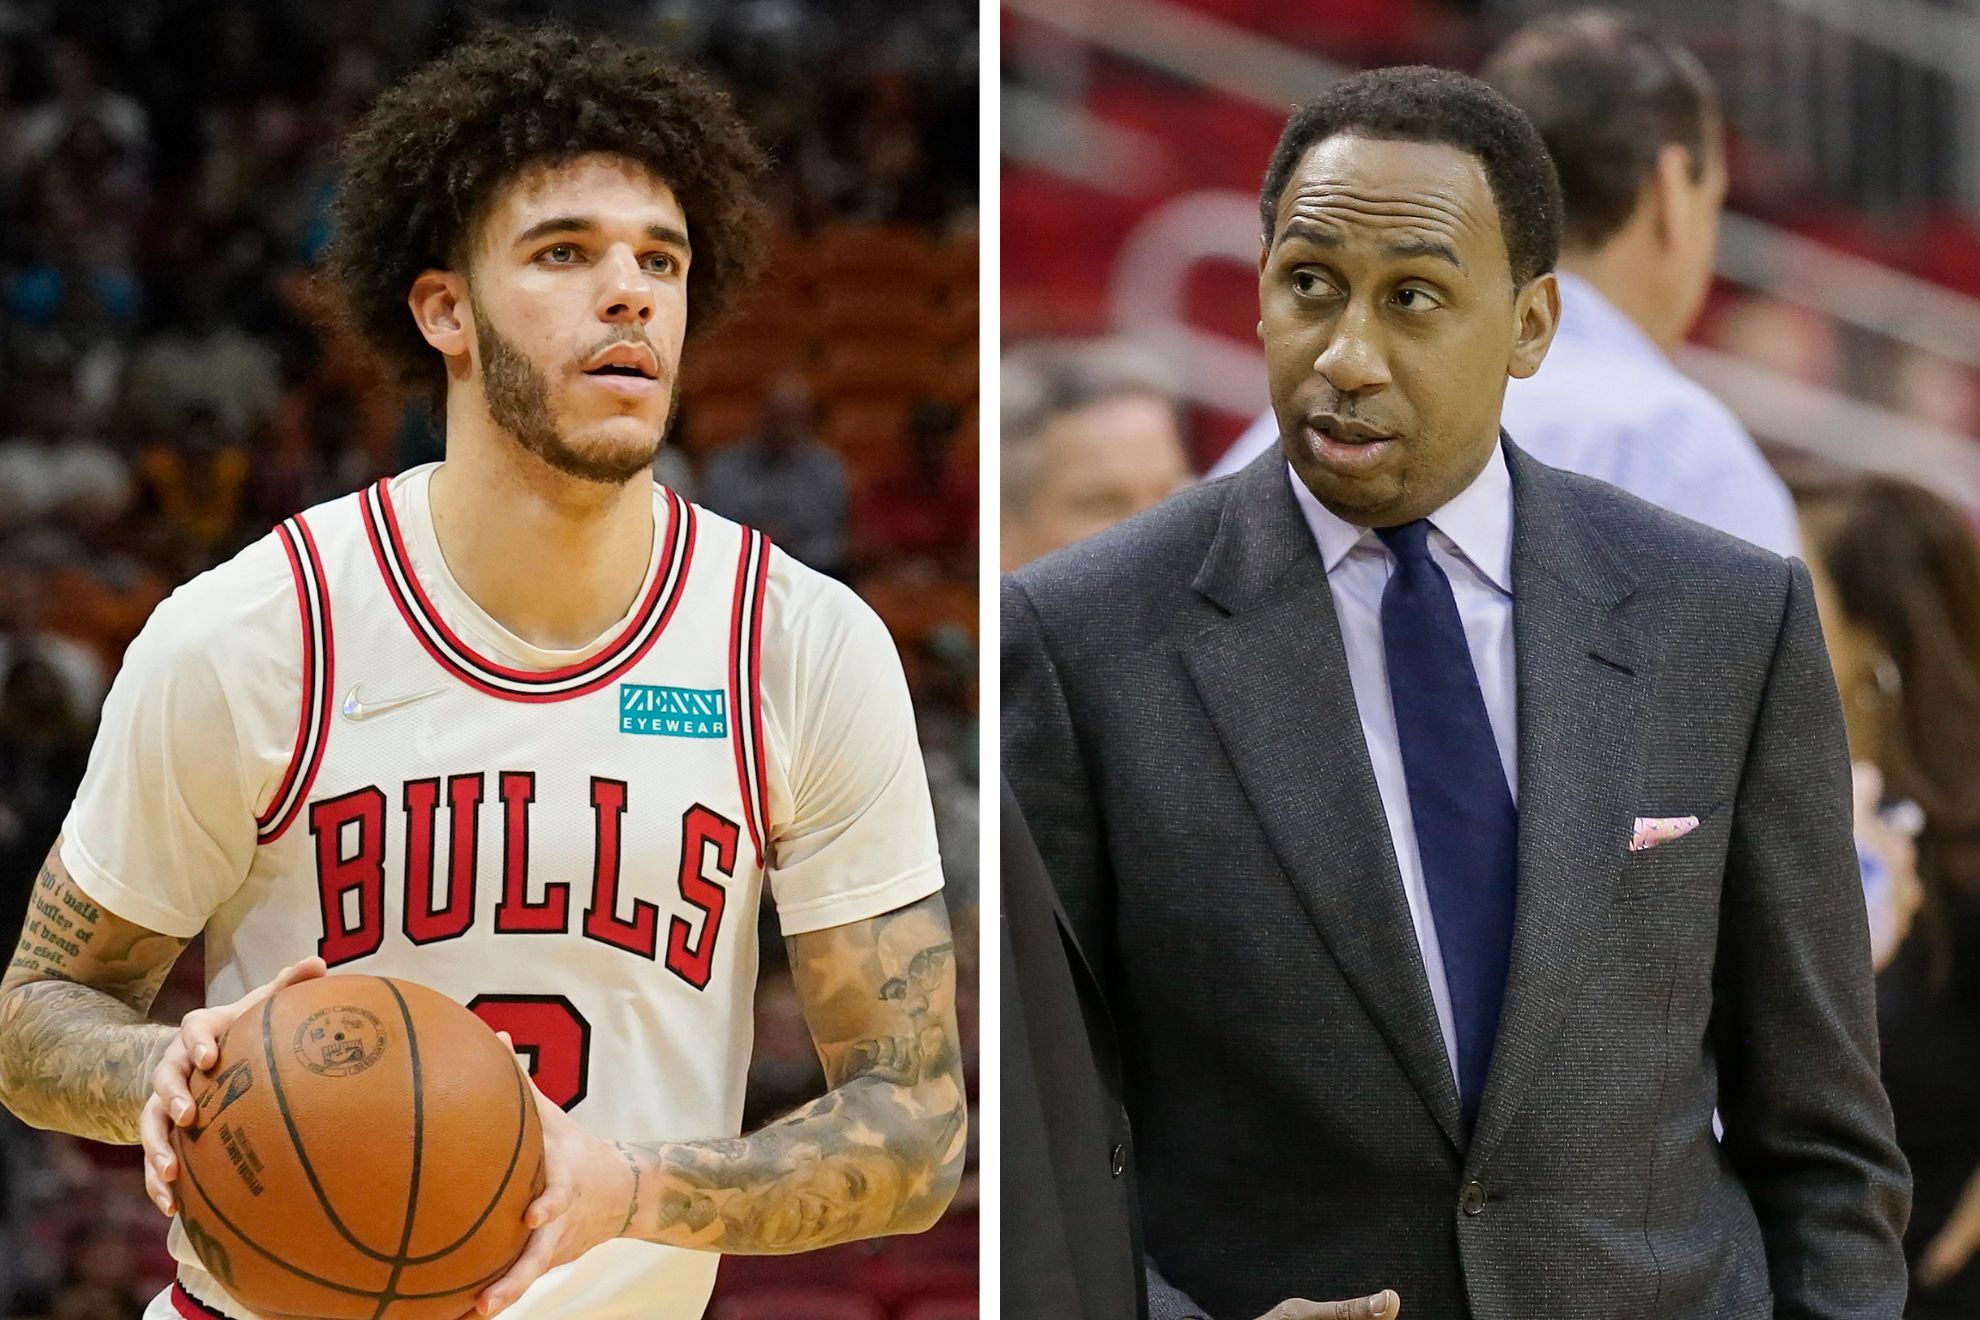 Lonzo Ball confirms he is 'going to play again' amid beef with Stephen A. Smith